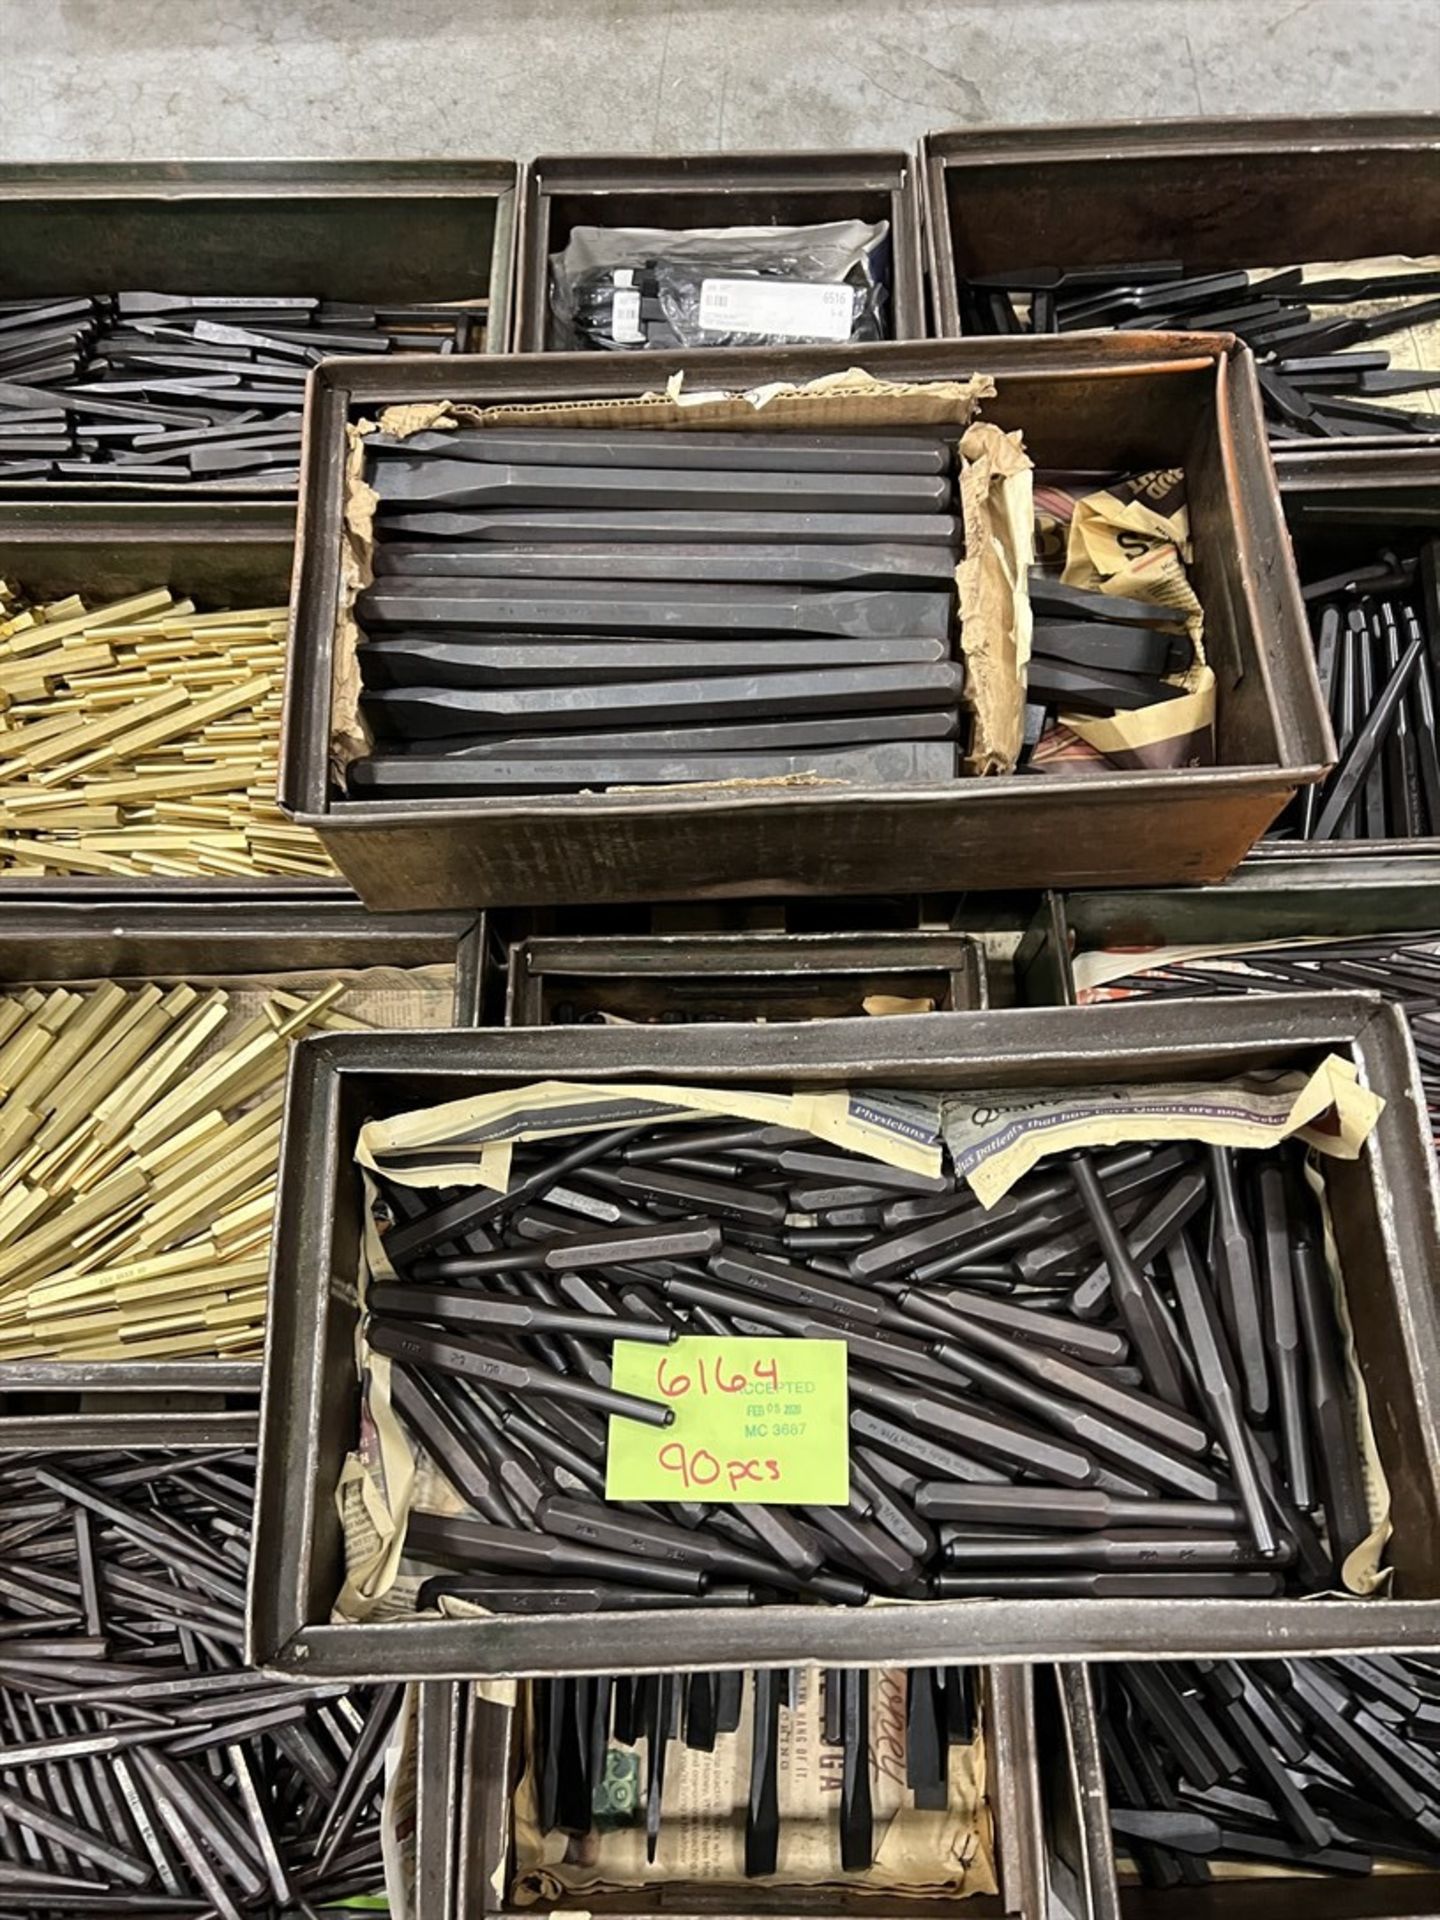 Pallet of Assorted Punches and Chisels - Image 3 of 4